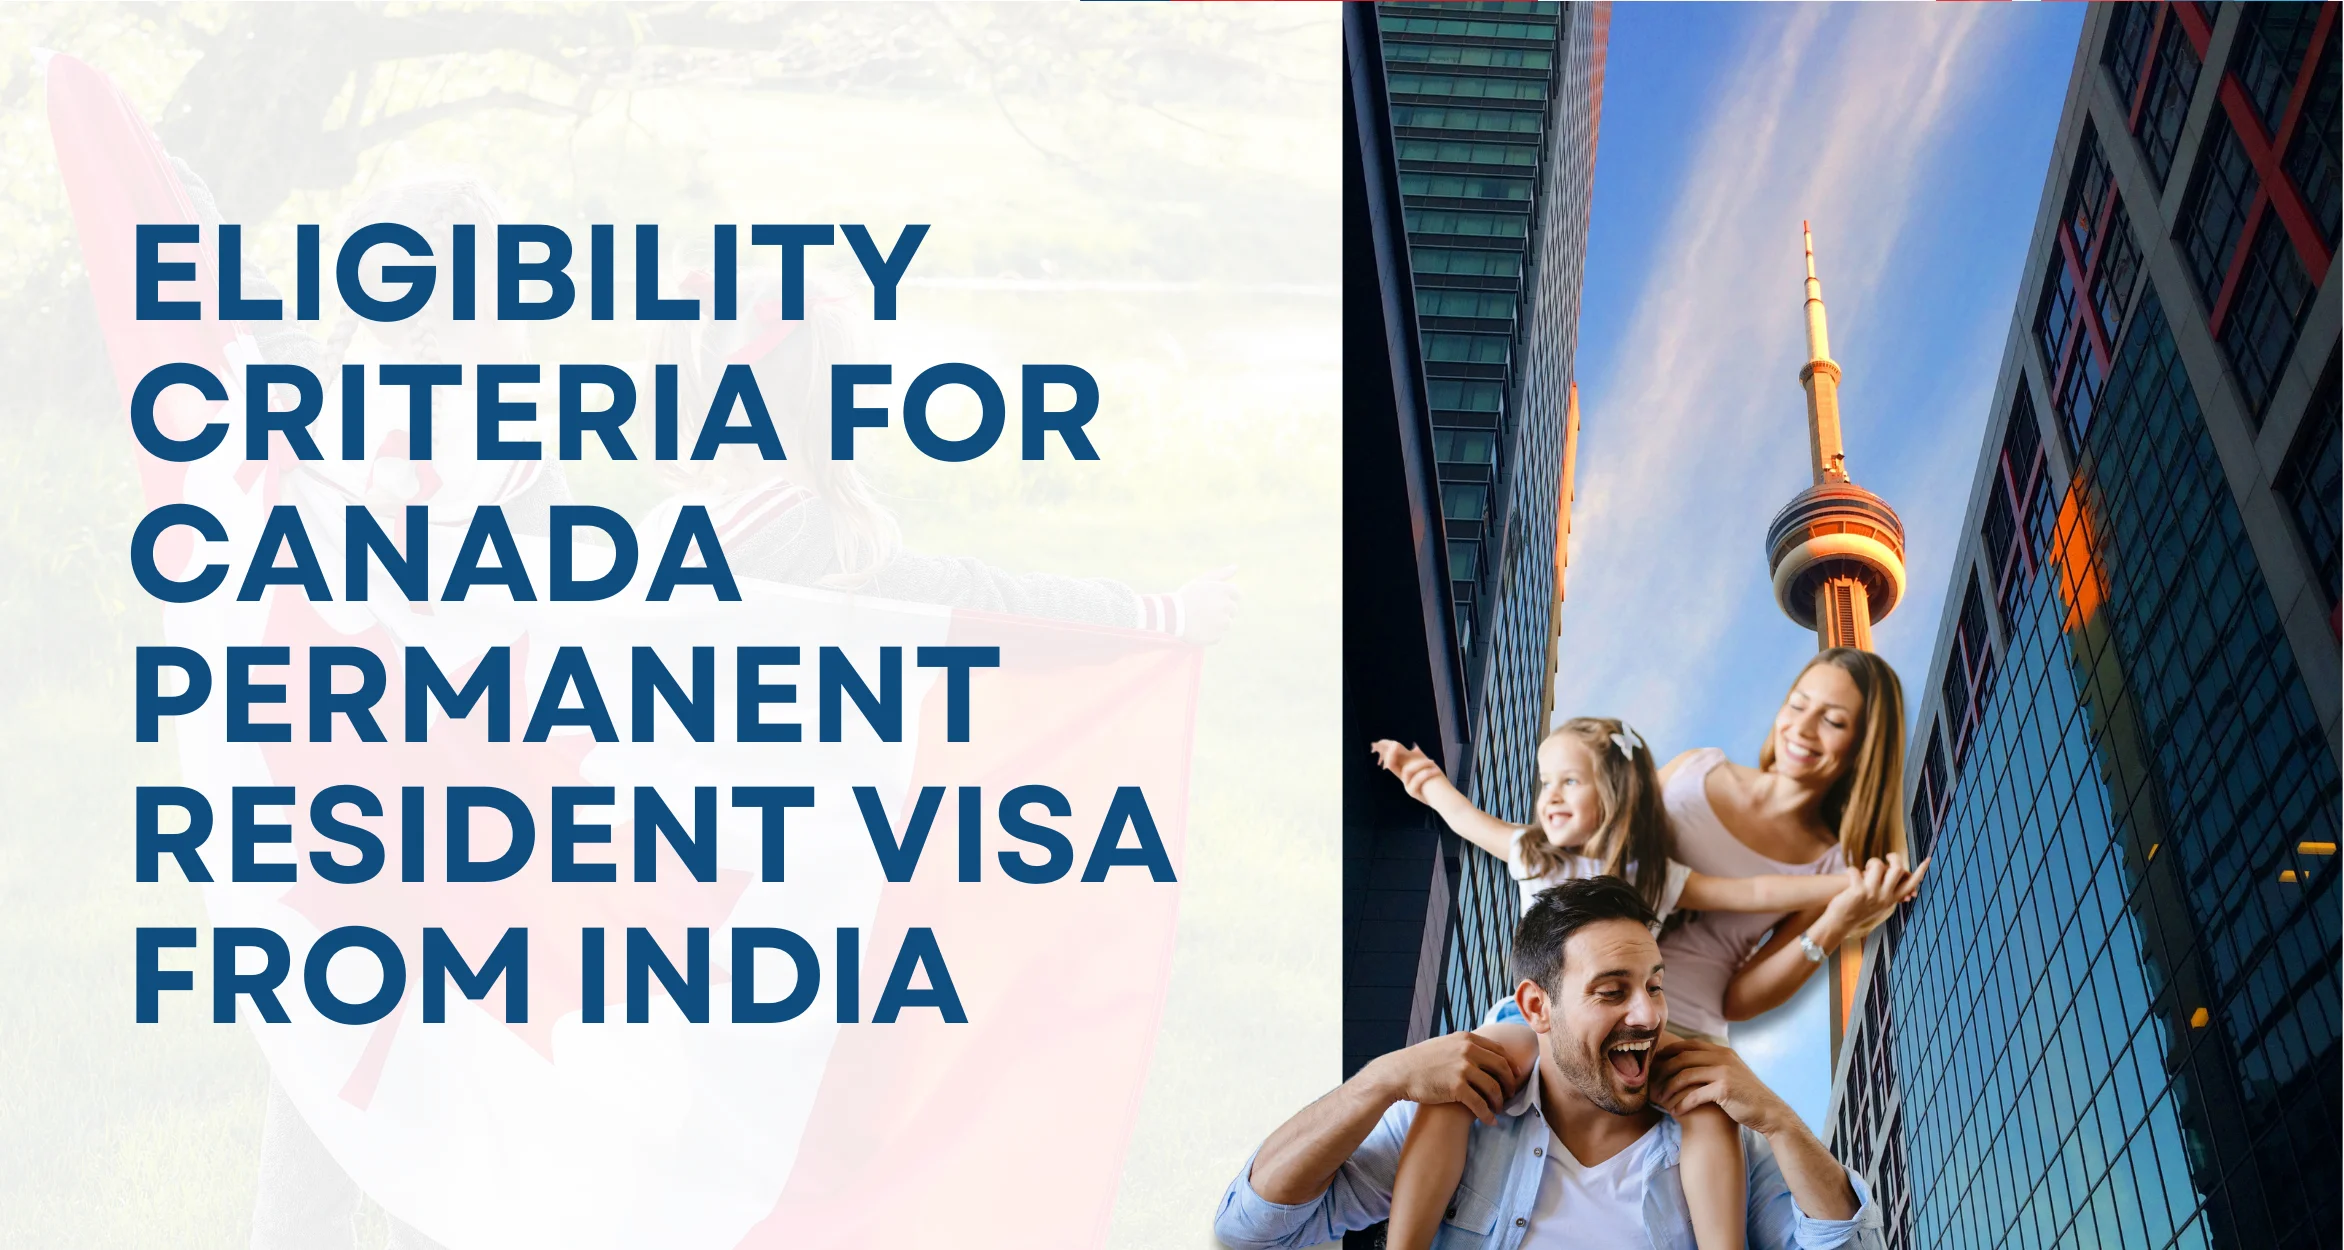 Eligibility criteria for Canada Permanent Resident visa from India